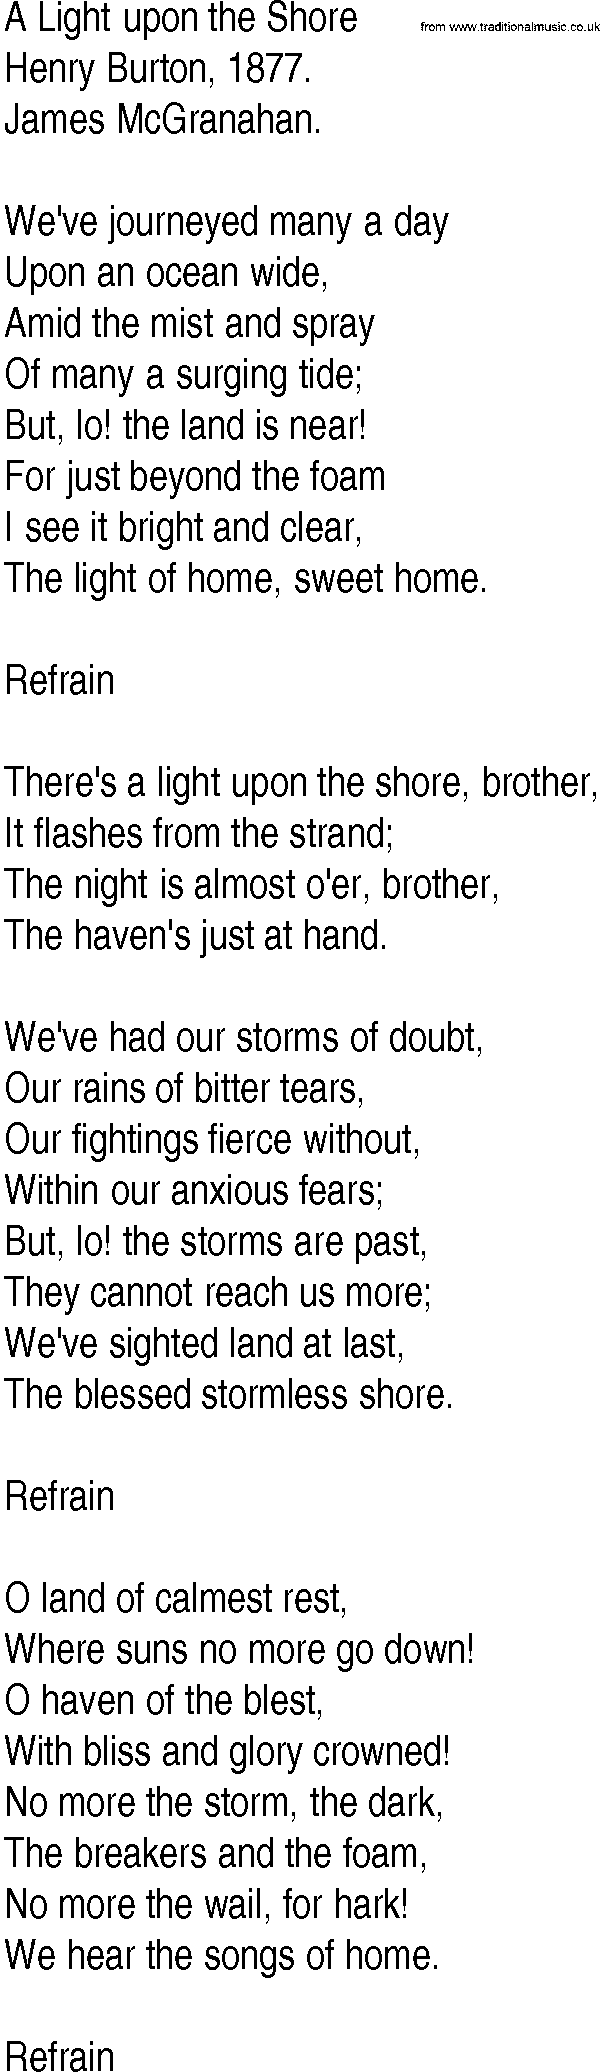 Hymn and Gospel Song: A Light upon the Shore by Henry Burton lyrics